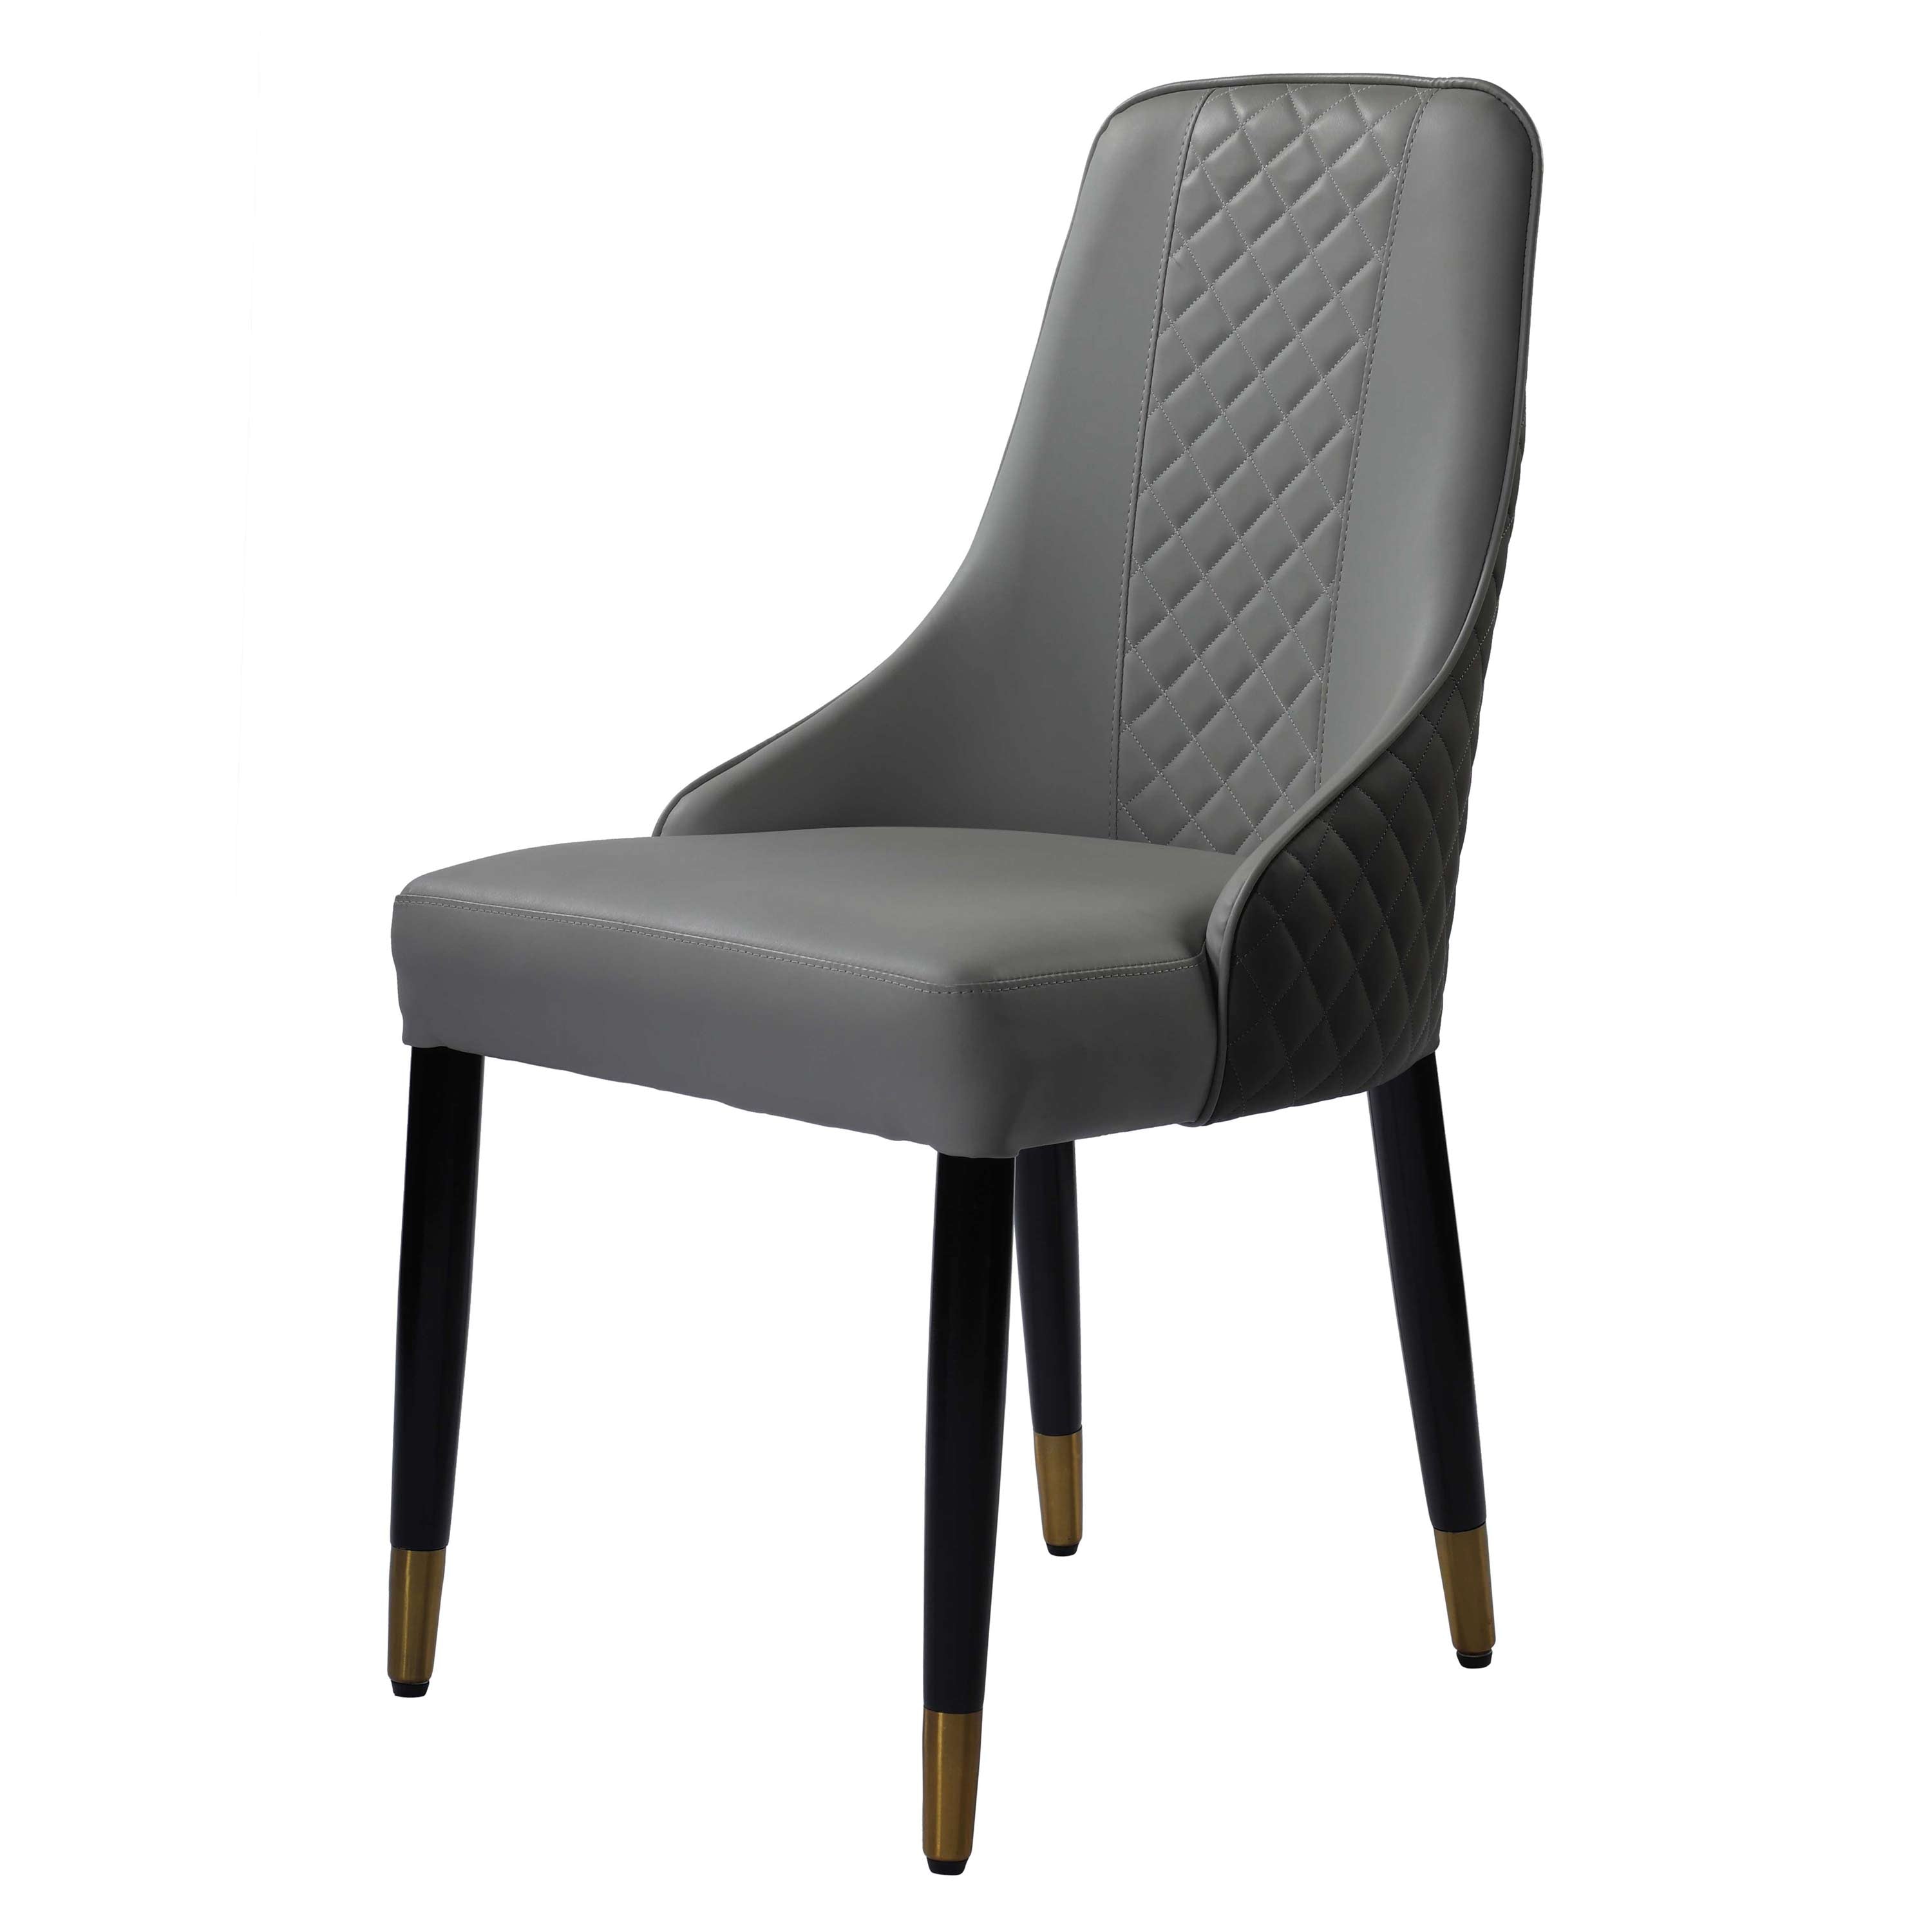 Elena Leather upholstered Dining chair with Gold Finish Metal Legs - Grey